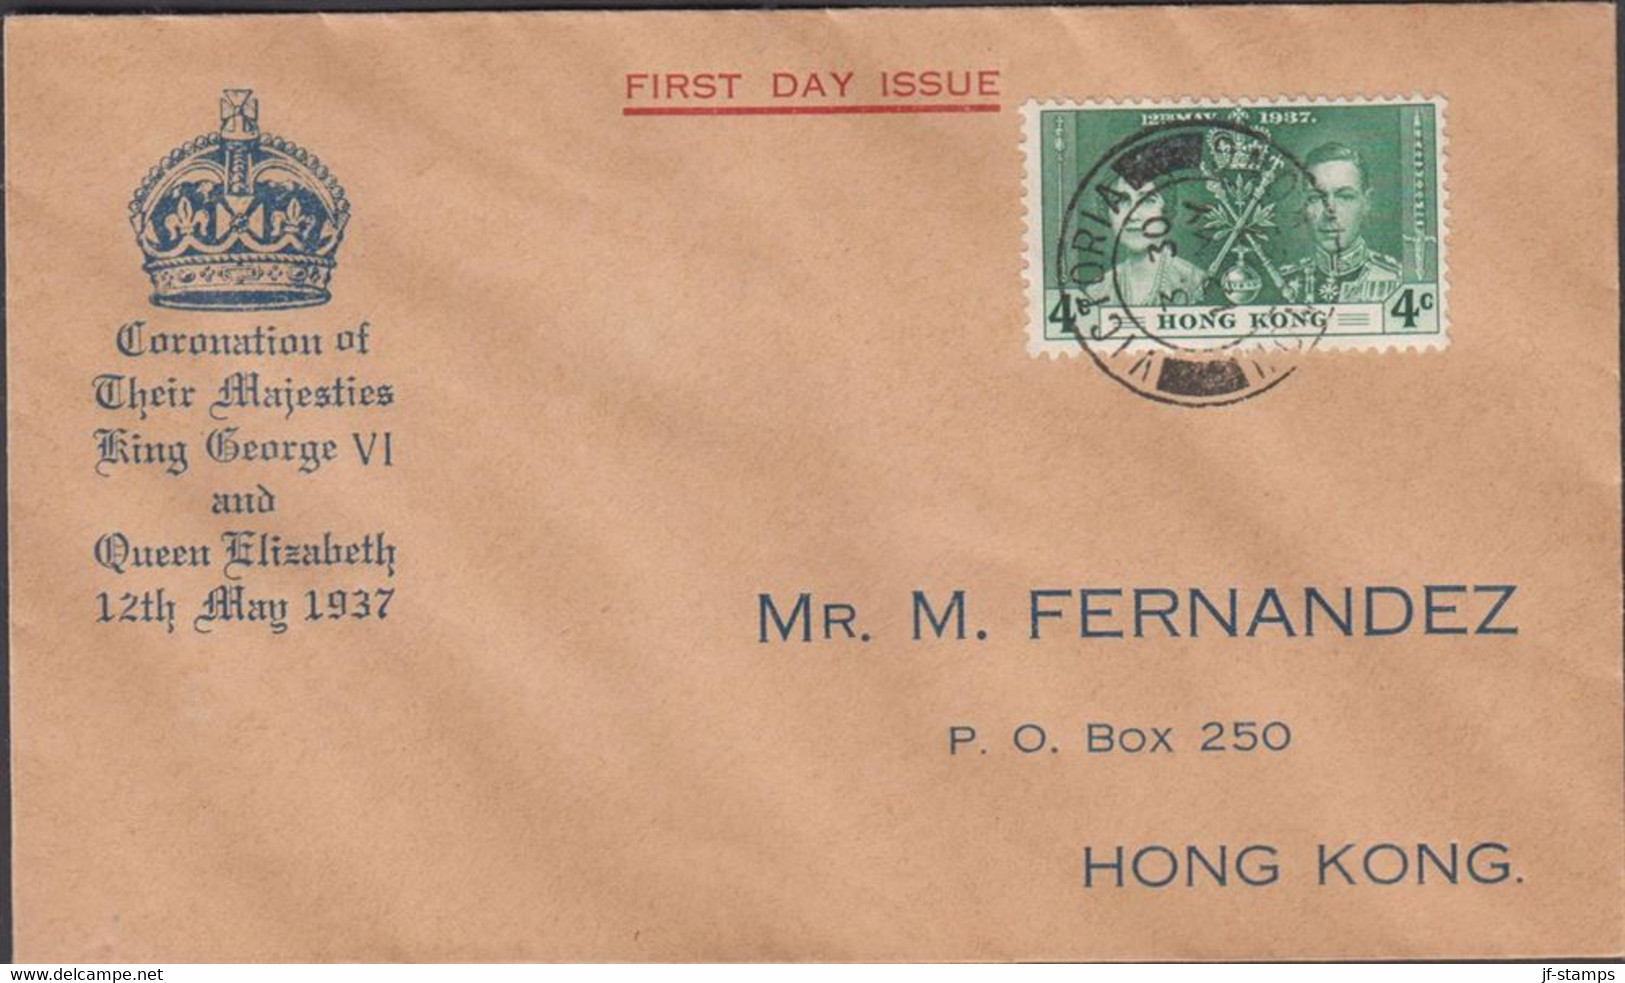 1937. HONG KONG Georg VI. 4 C Coronation On Nice FDC Cancelled FIRST DAY OF ISSUE VICTORIA HO... (Michel 136) - JF427052 - Briefe U. Dokumente